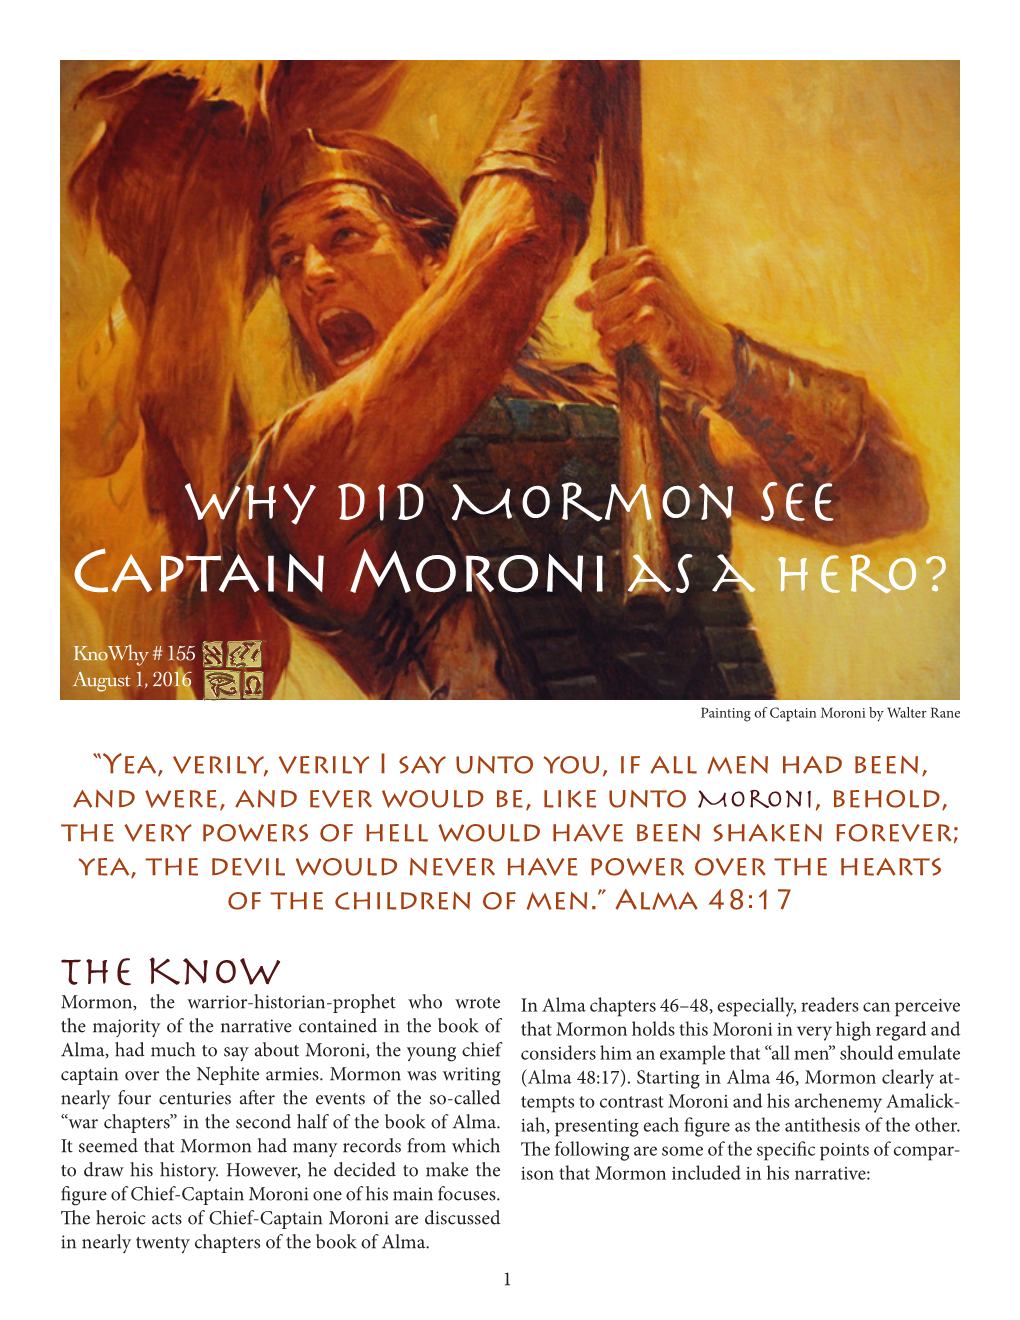 Why Did Mormon See Captain Moroni As a Hero?